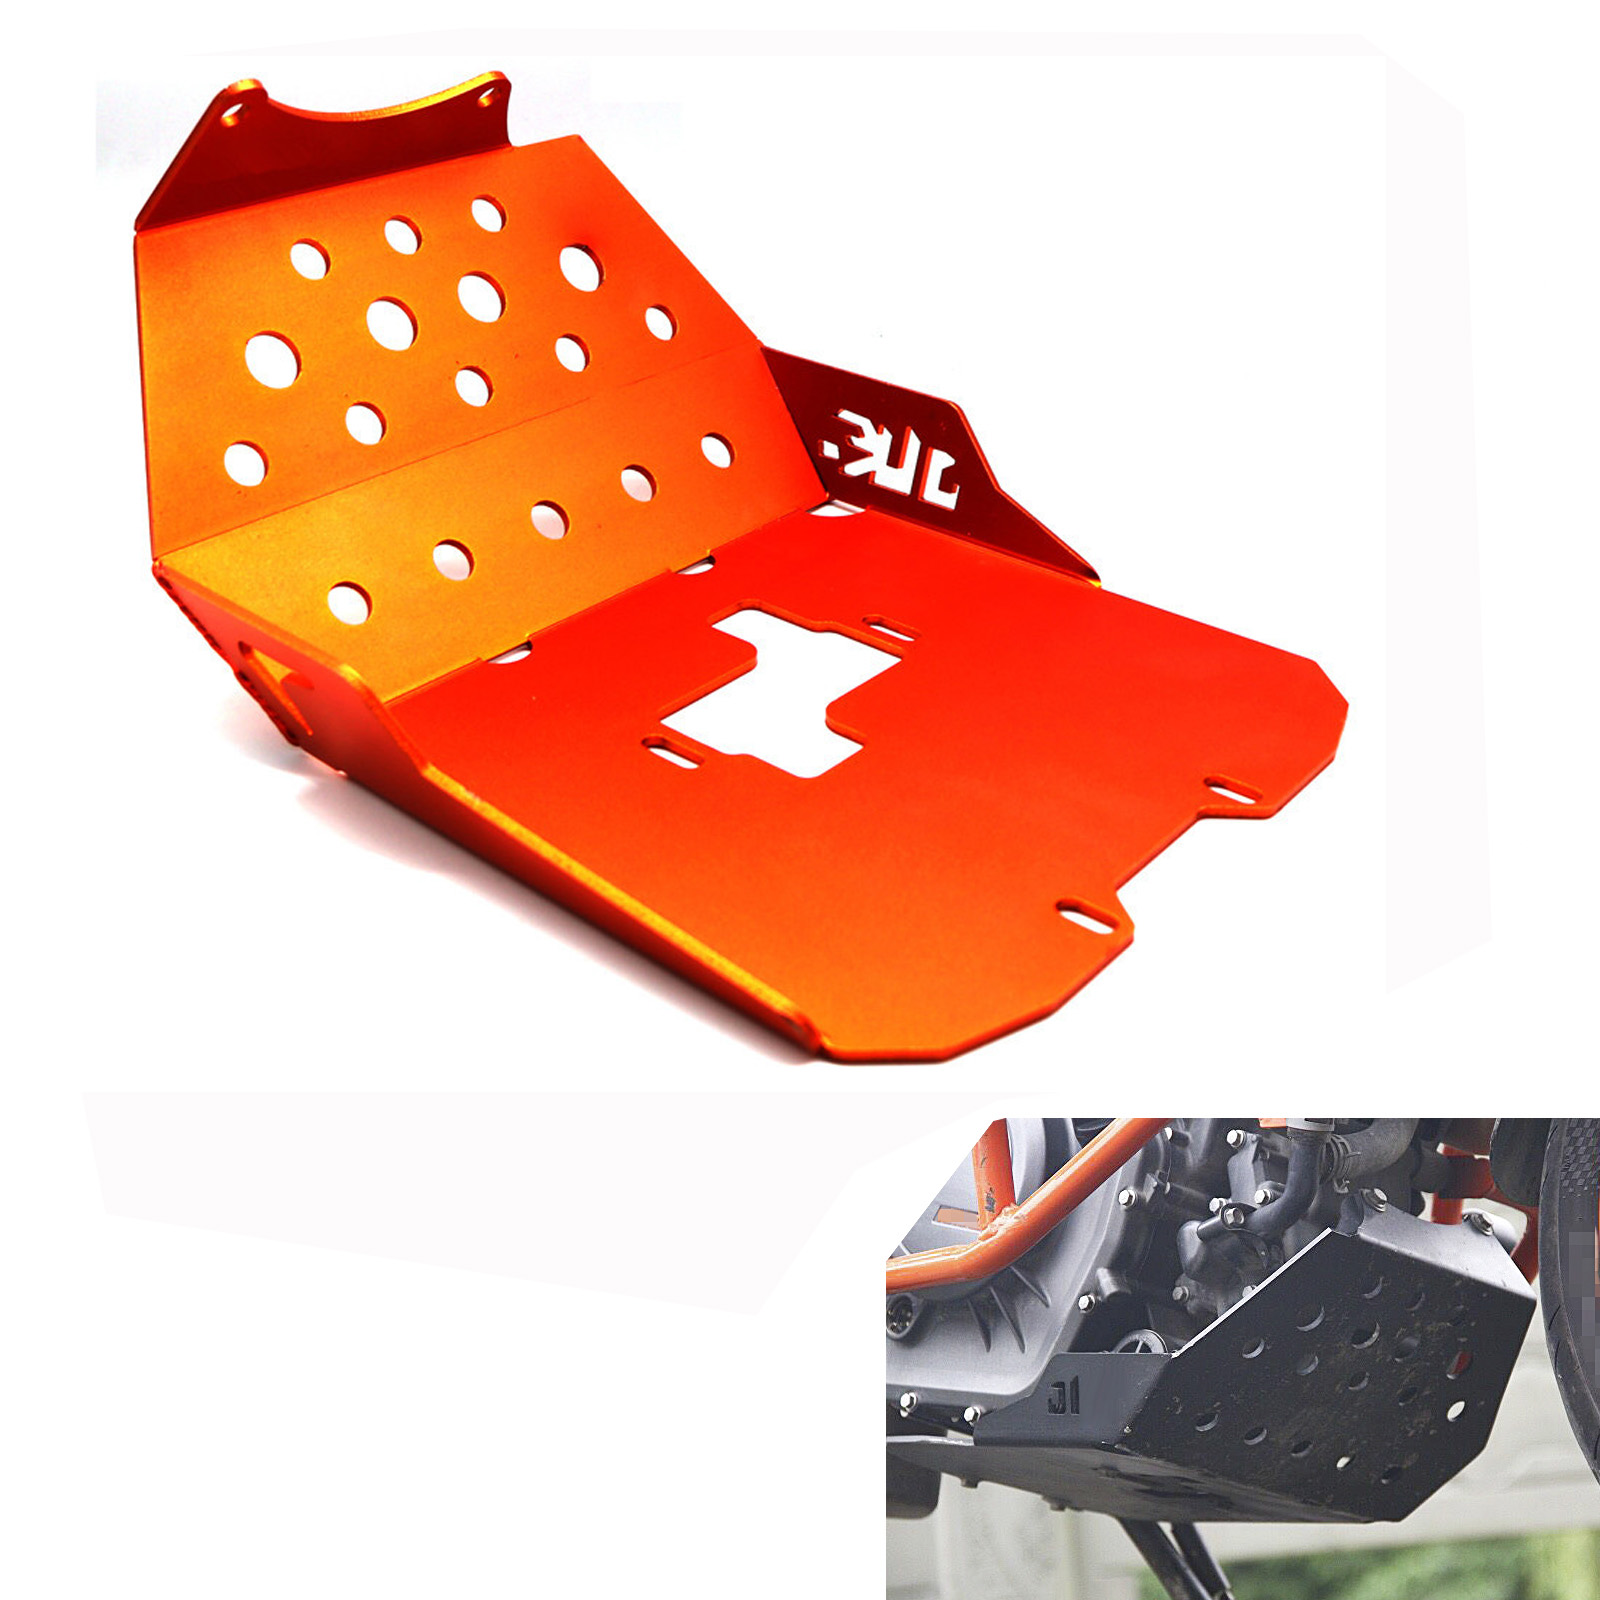 Aluminum Motorcycle Engine Guard Protector Skid Plate For KTM DUKE 390 13-16